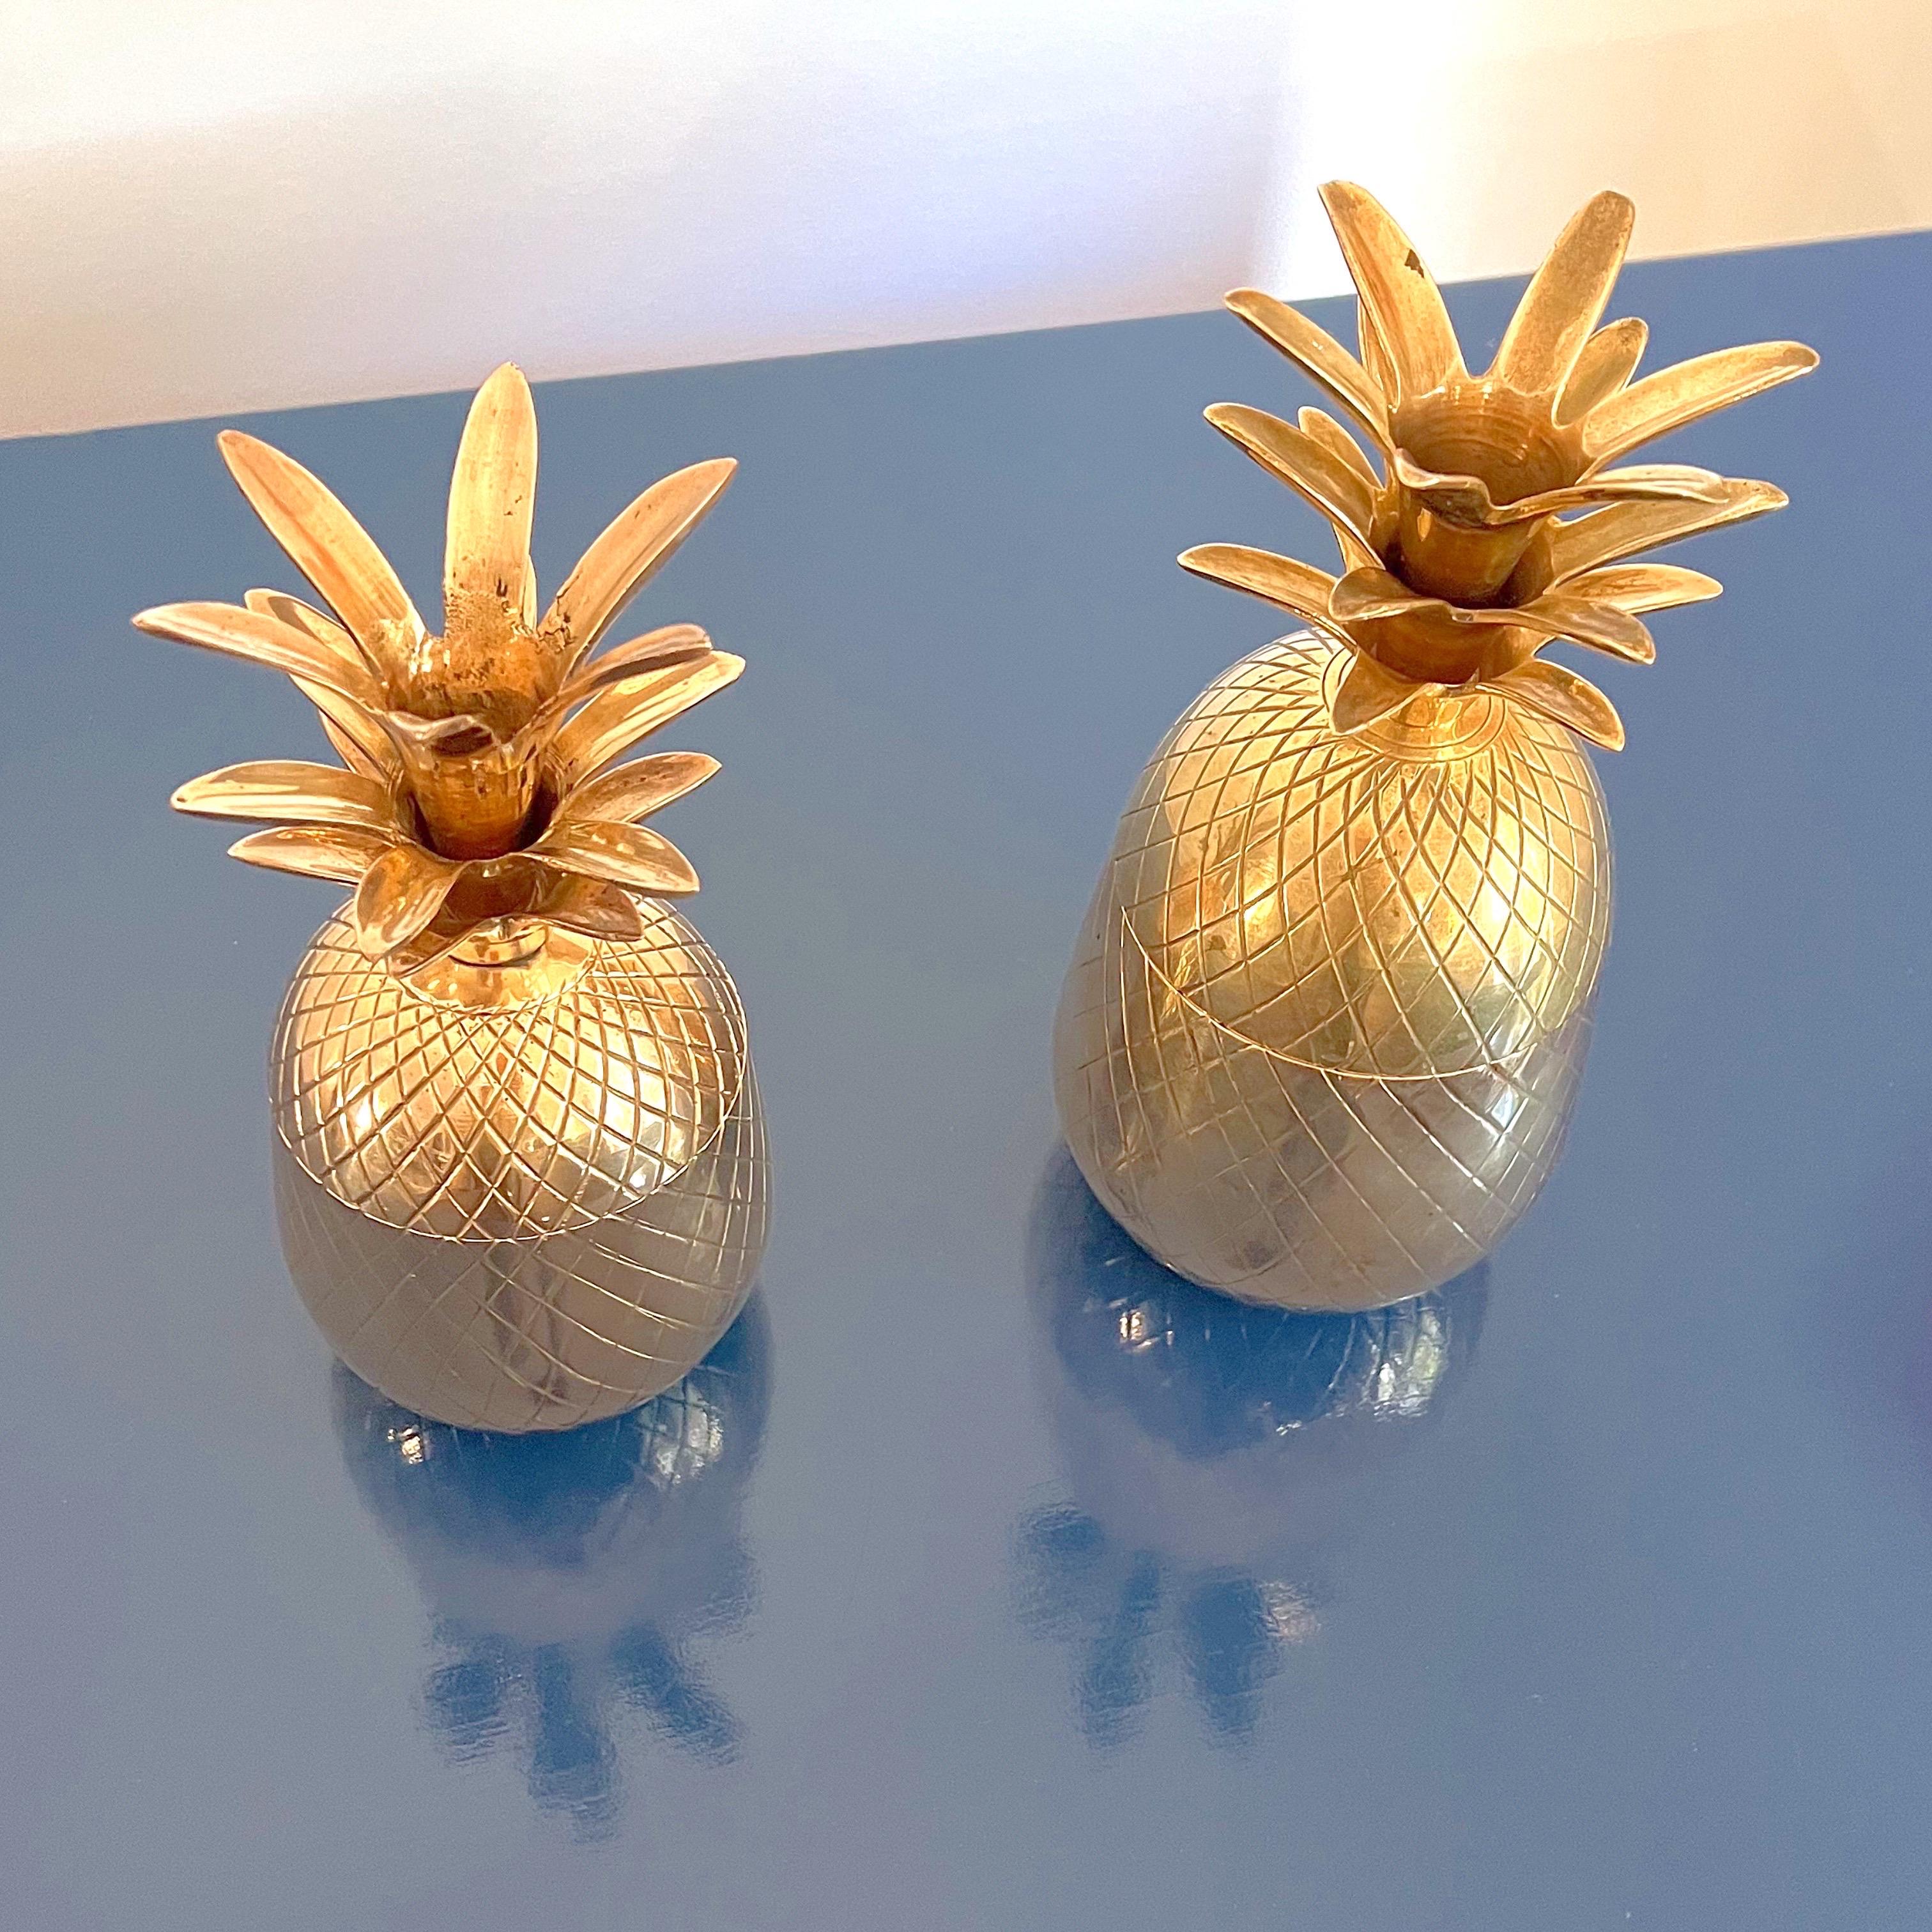 Here we have a set of two vintage brass lidded pineapple containers, one still carrying the older style Handmade in India sticker on the bottom. Use to hold jewelry, trinkets, or as classic shelf display in decor from midcentury modern to rustic.